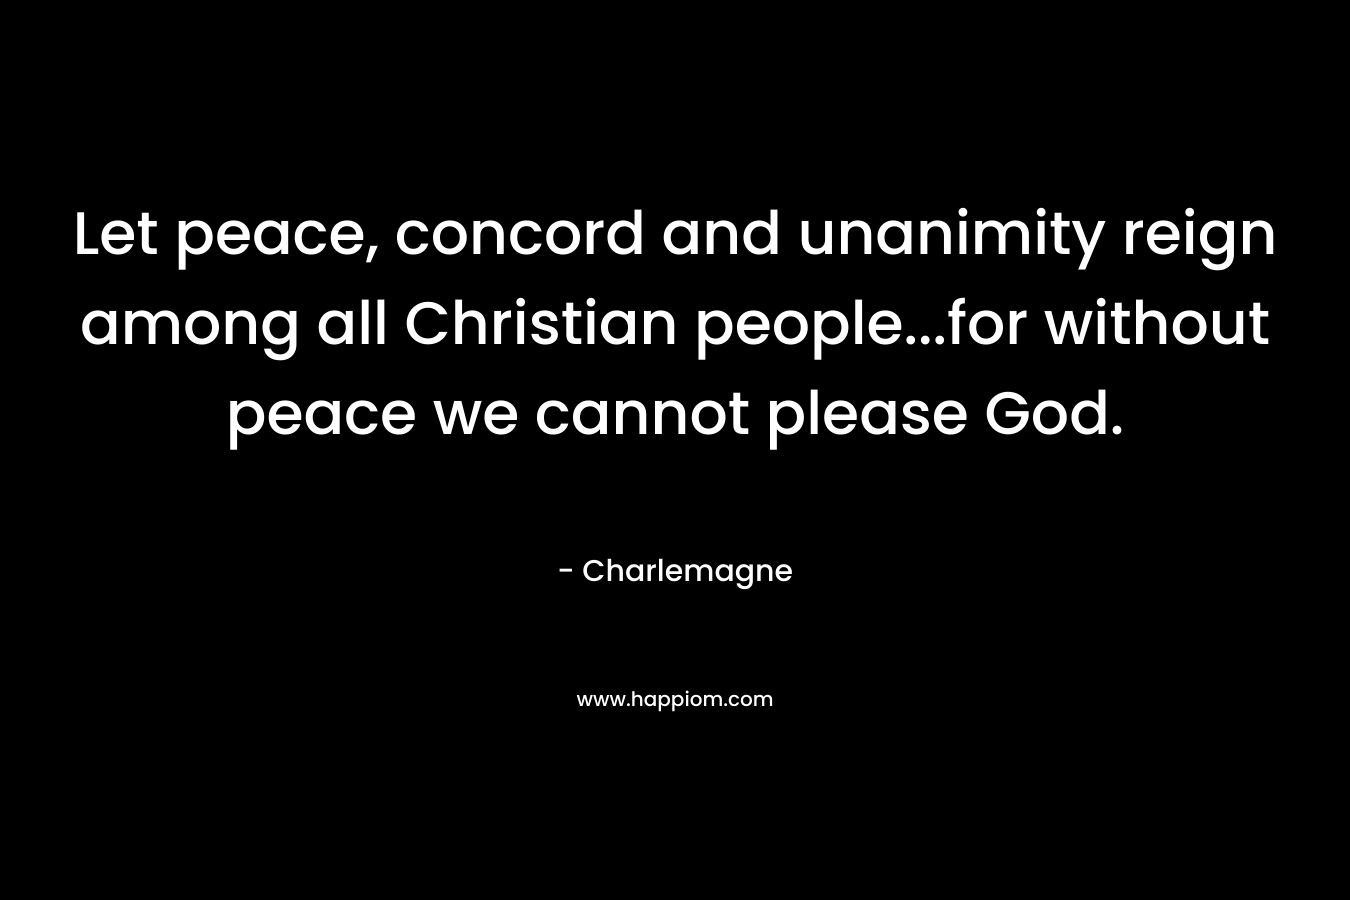 Let peace, concord and unanimity reign among all Christian people…for without peace we cannot please God. – Charlemagne